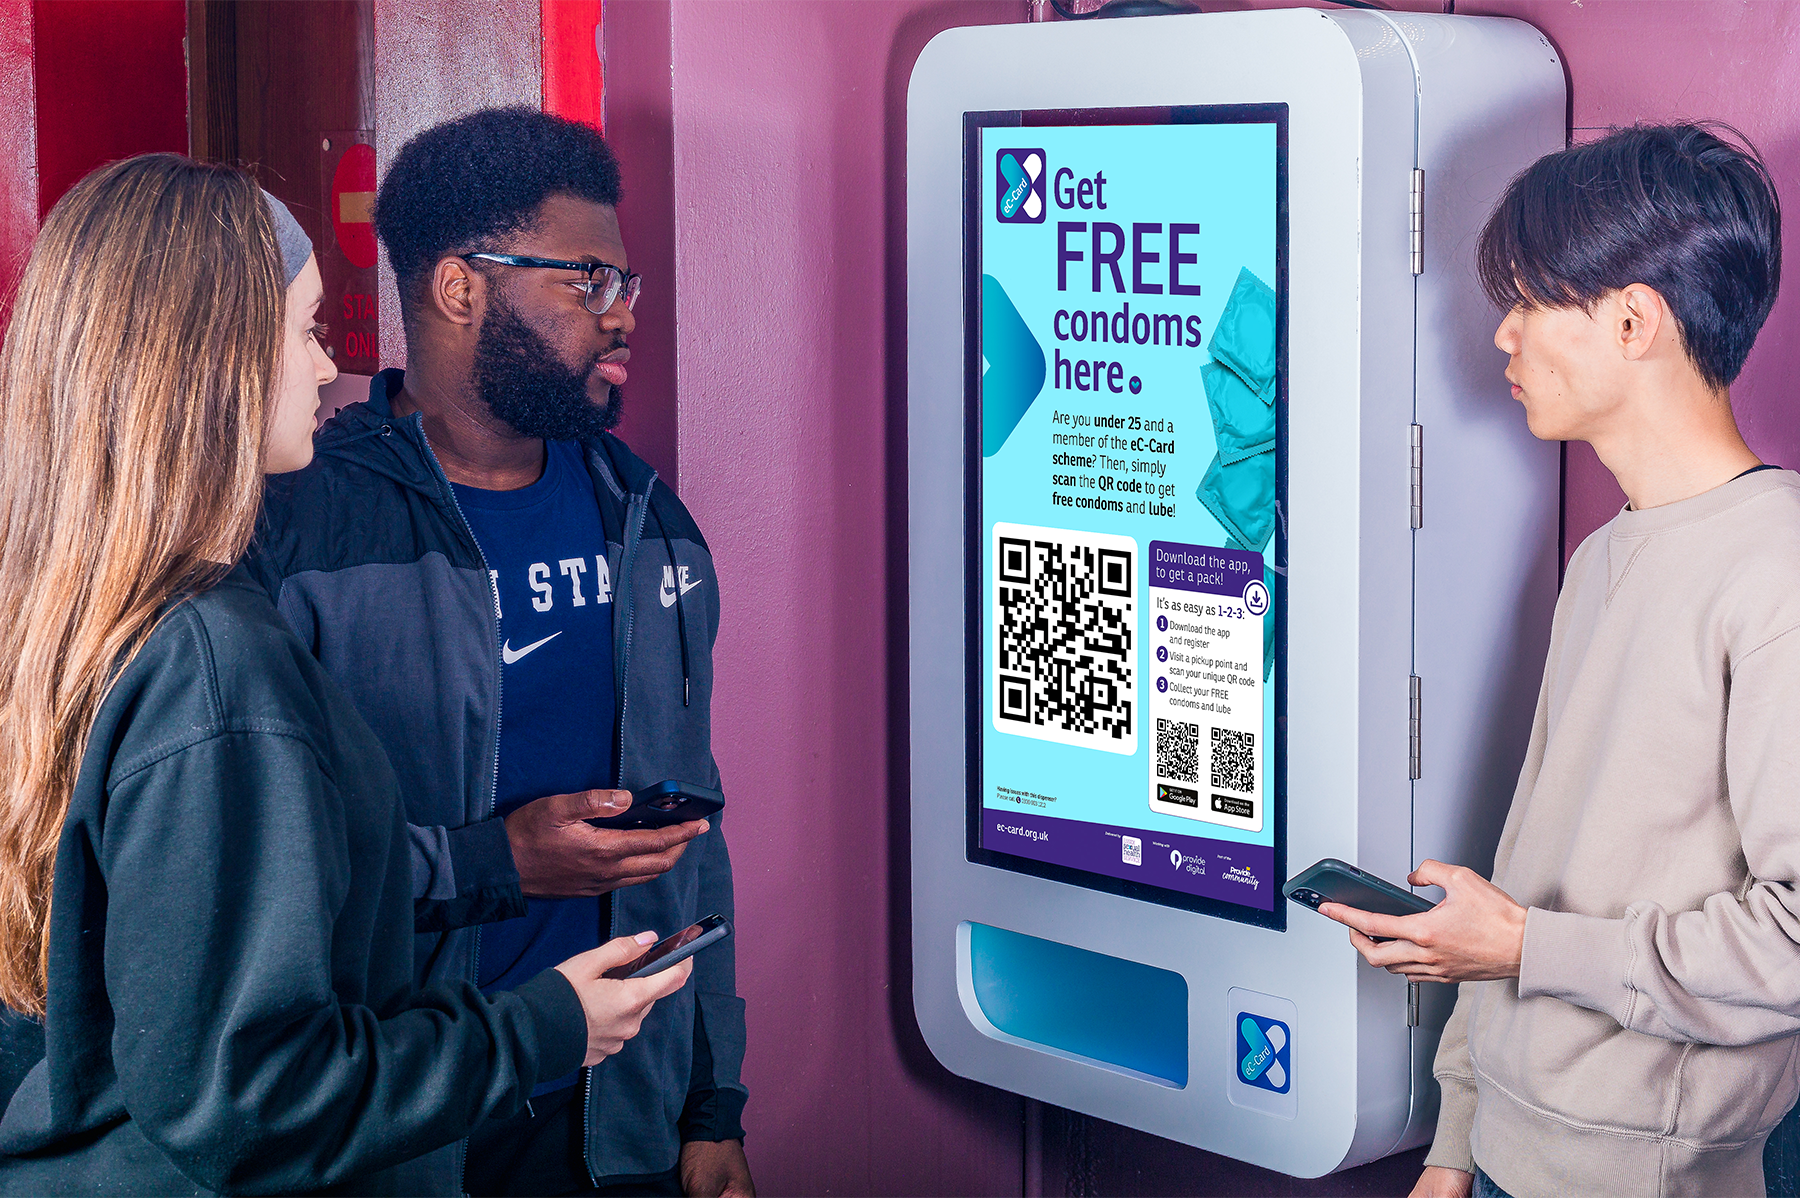 Innovative vending machine launched to distribute free condoms at the University of Essex